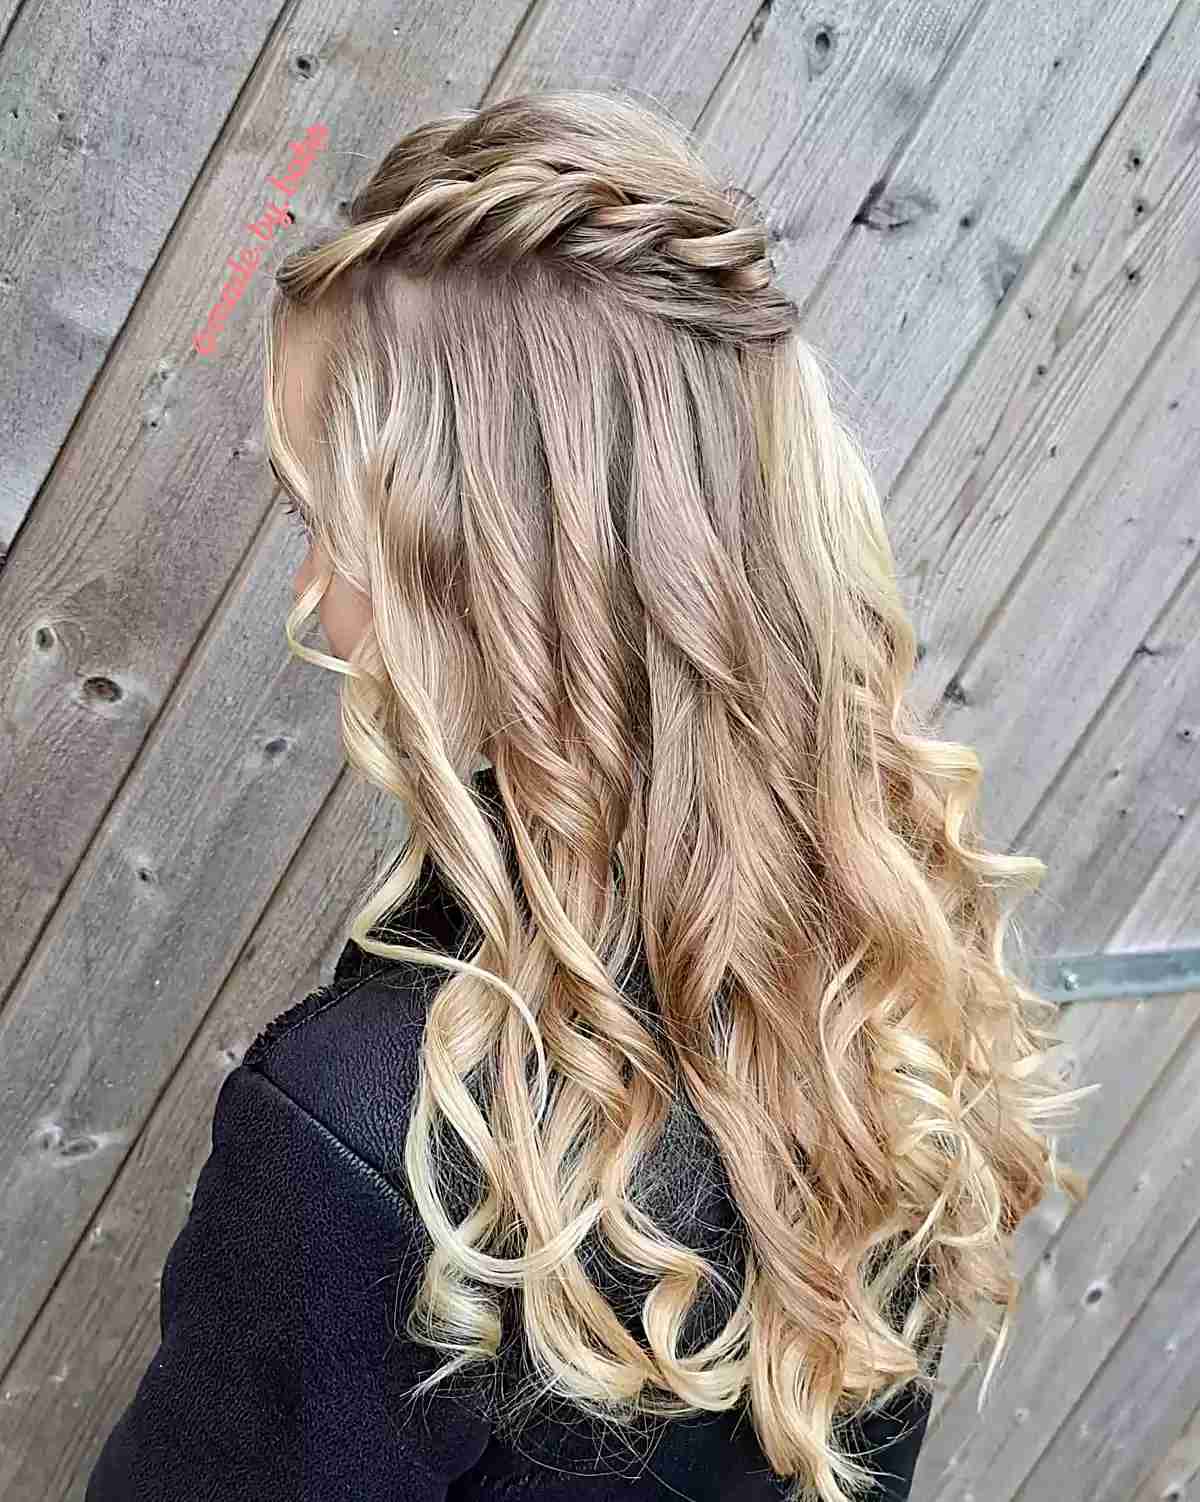 Romantic Half Down with Curls and Rope Braids for the Prom